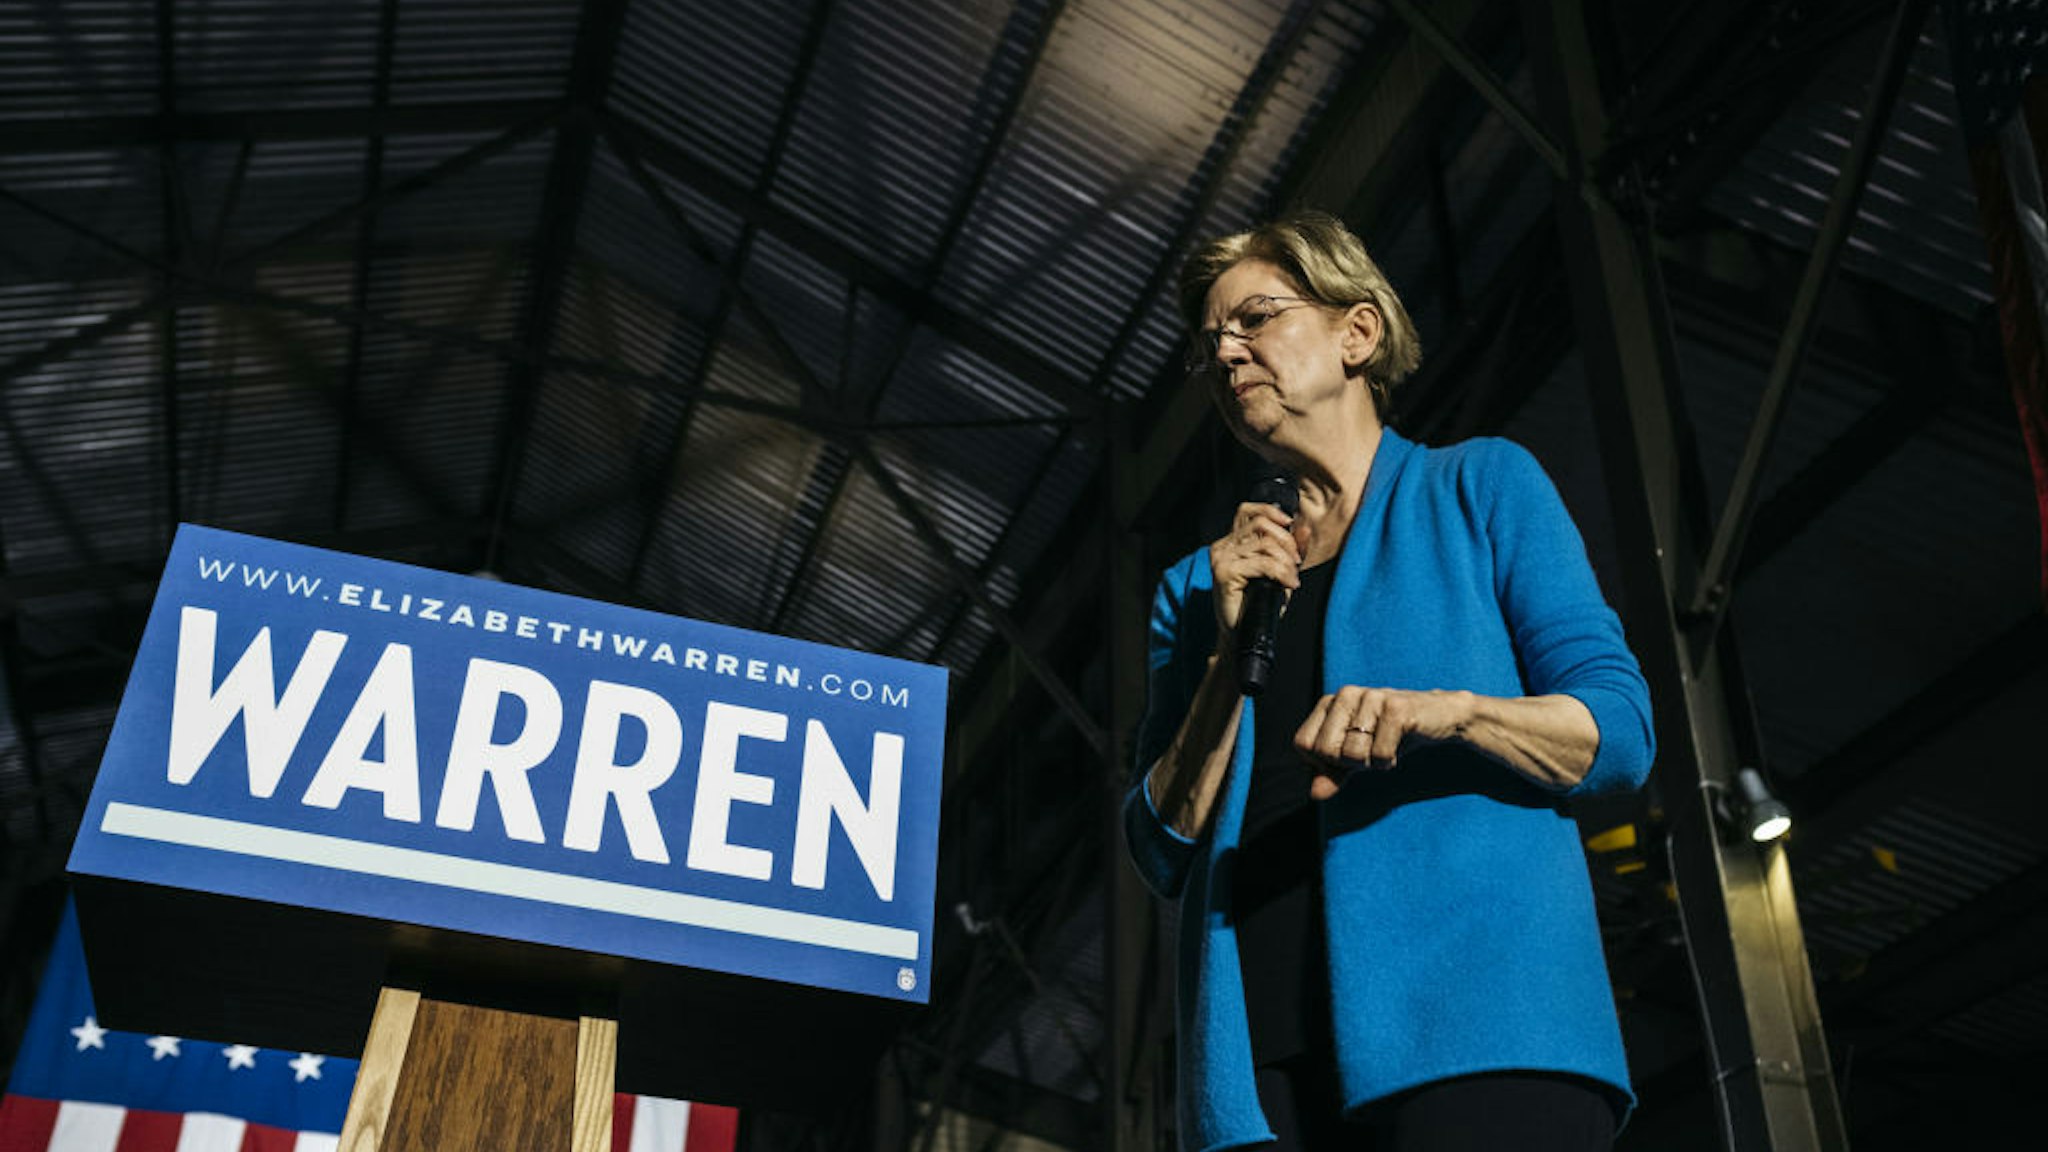 Senator Elizabeth Warren, a Democrat from Massachusetts and 2020 presidential candidate, pauses while speaking during a rally in Detroit, Michigan, U.S., on Tuesday, March 3, 2020.